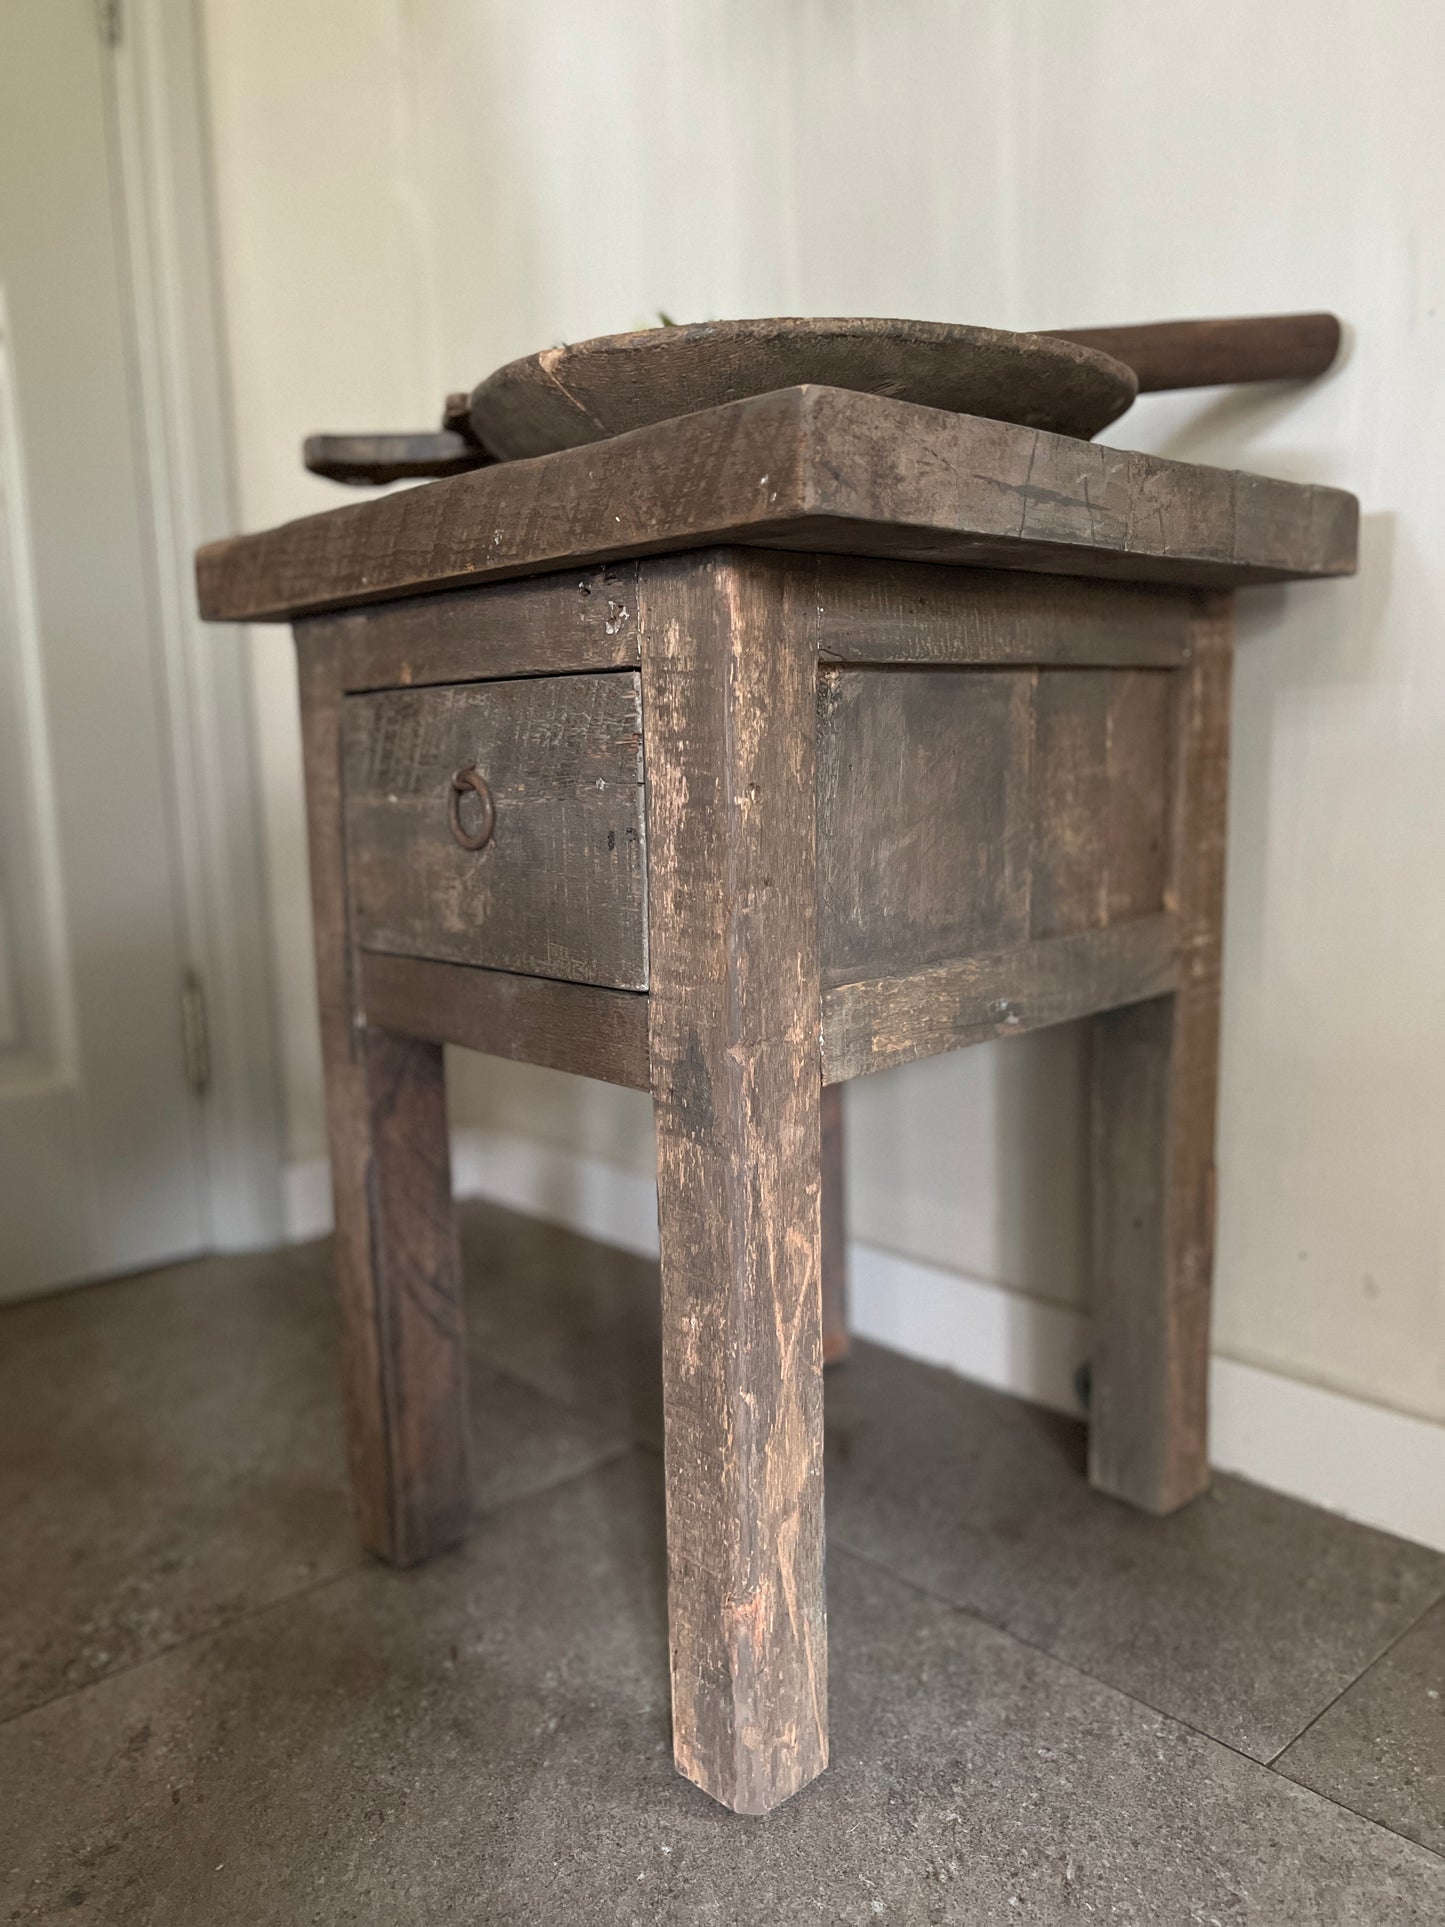 Driftwood side table, 1 drawer